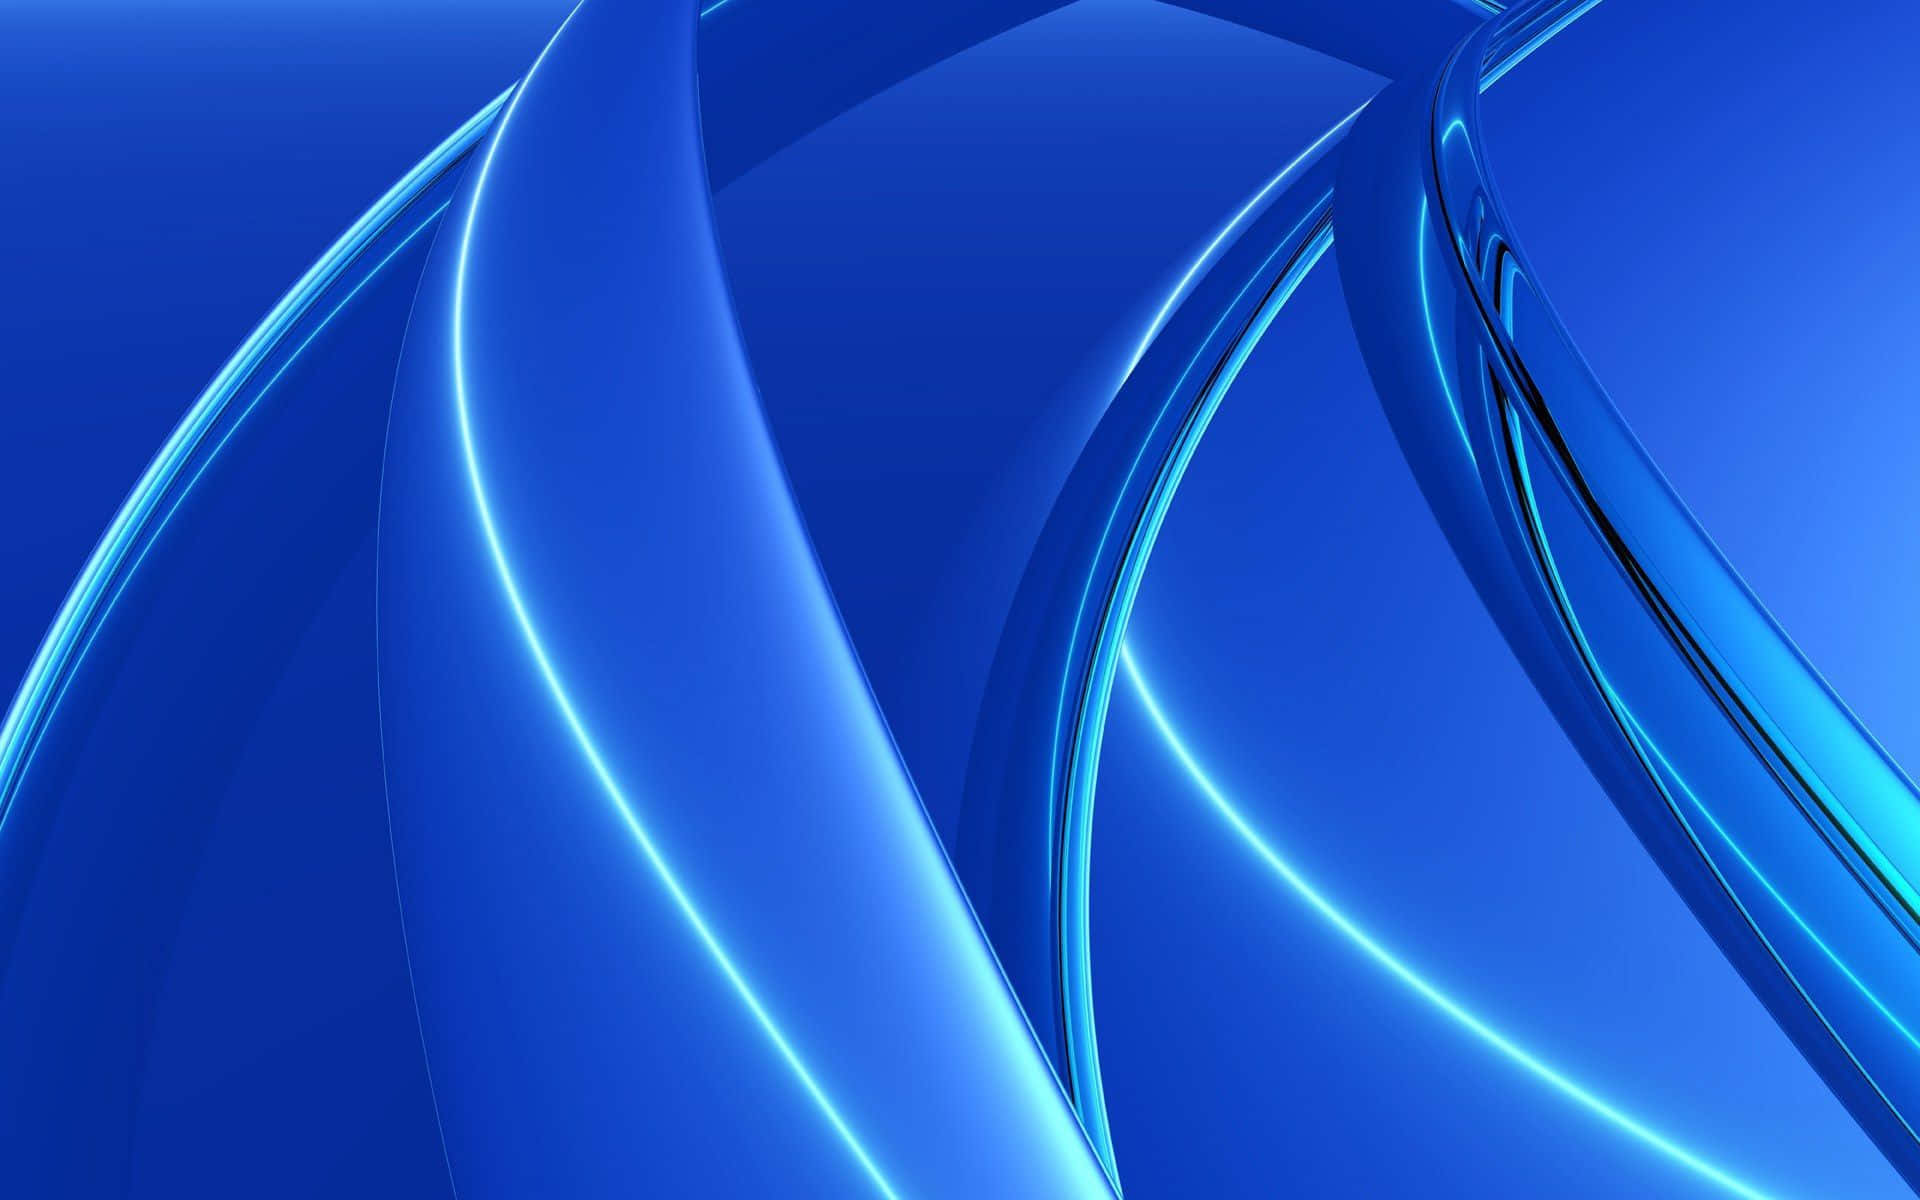 Bright Blue Abstract Artistic Background